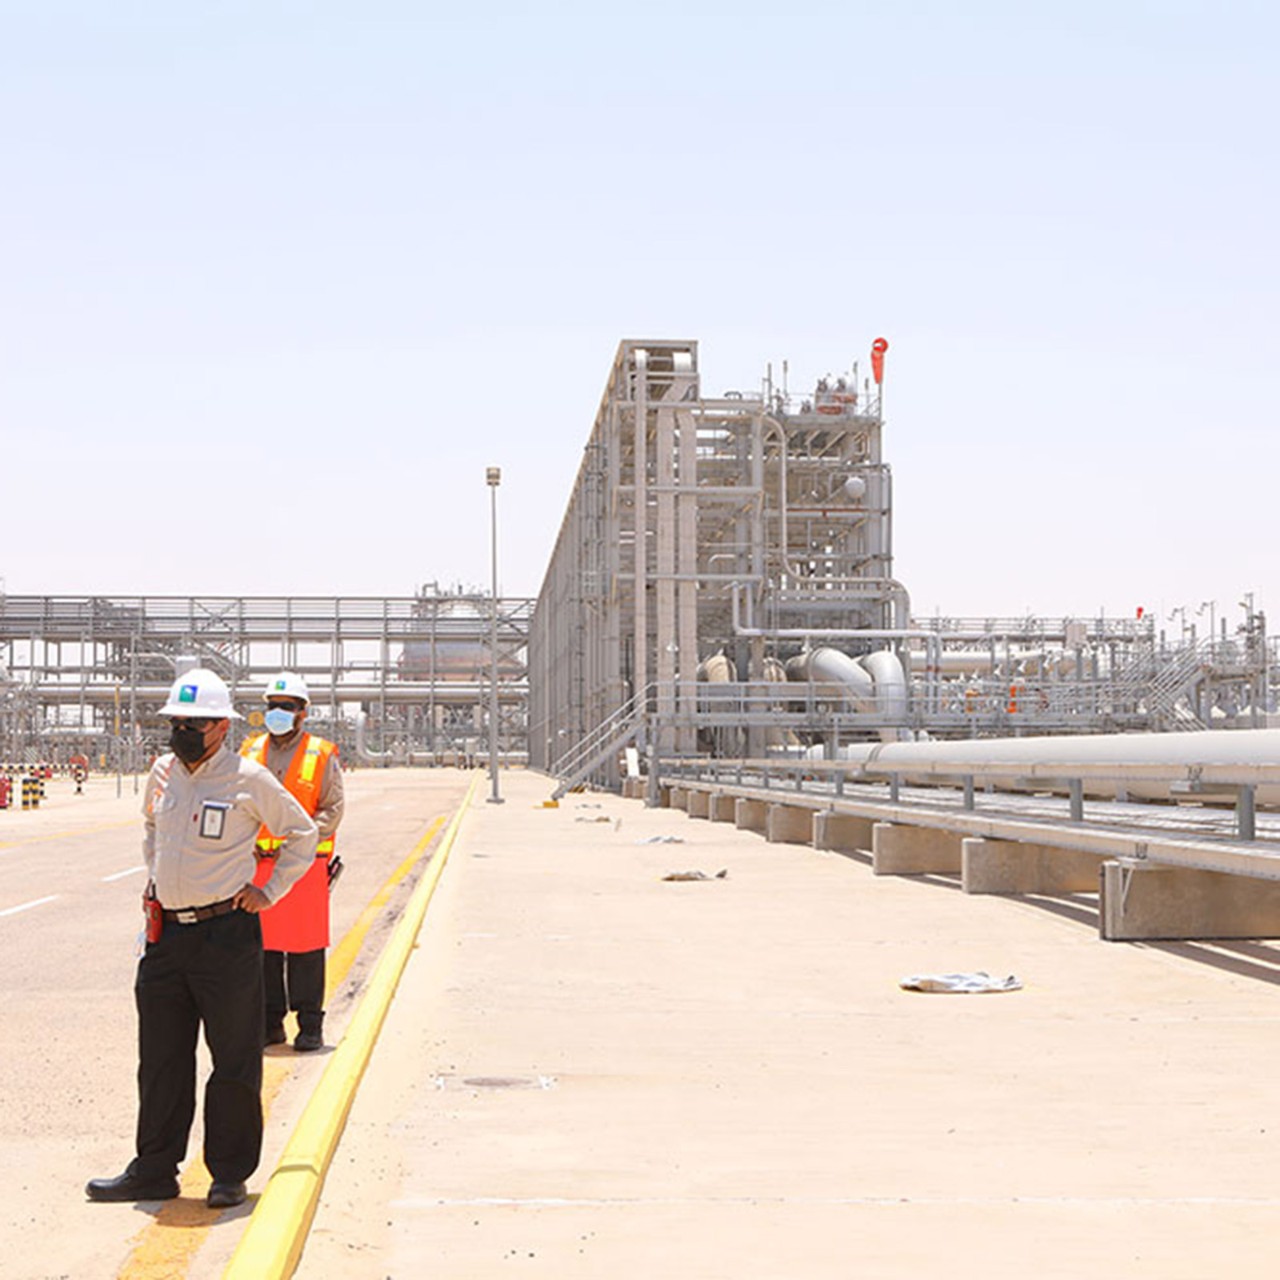 The Hawiyah natural gas liquids recovery plant in Saudi Arabia is a pilot project to prove the possibility of capturing C02 and lowering emissions from such facilities